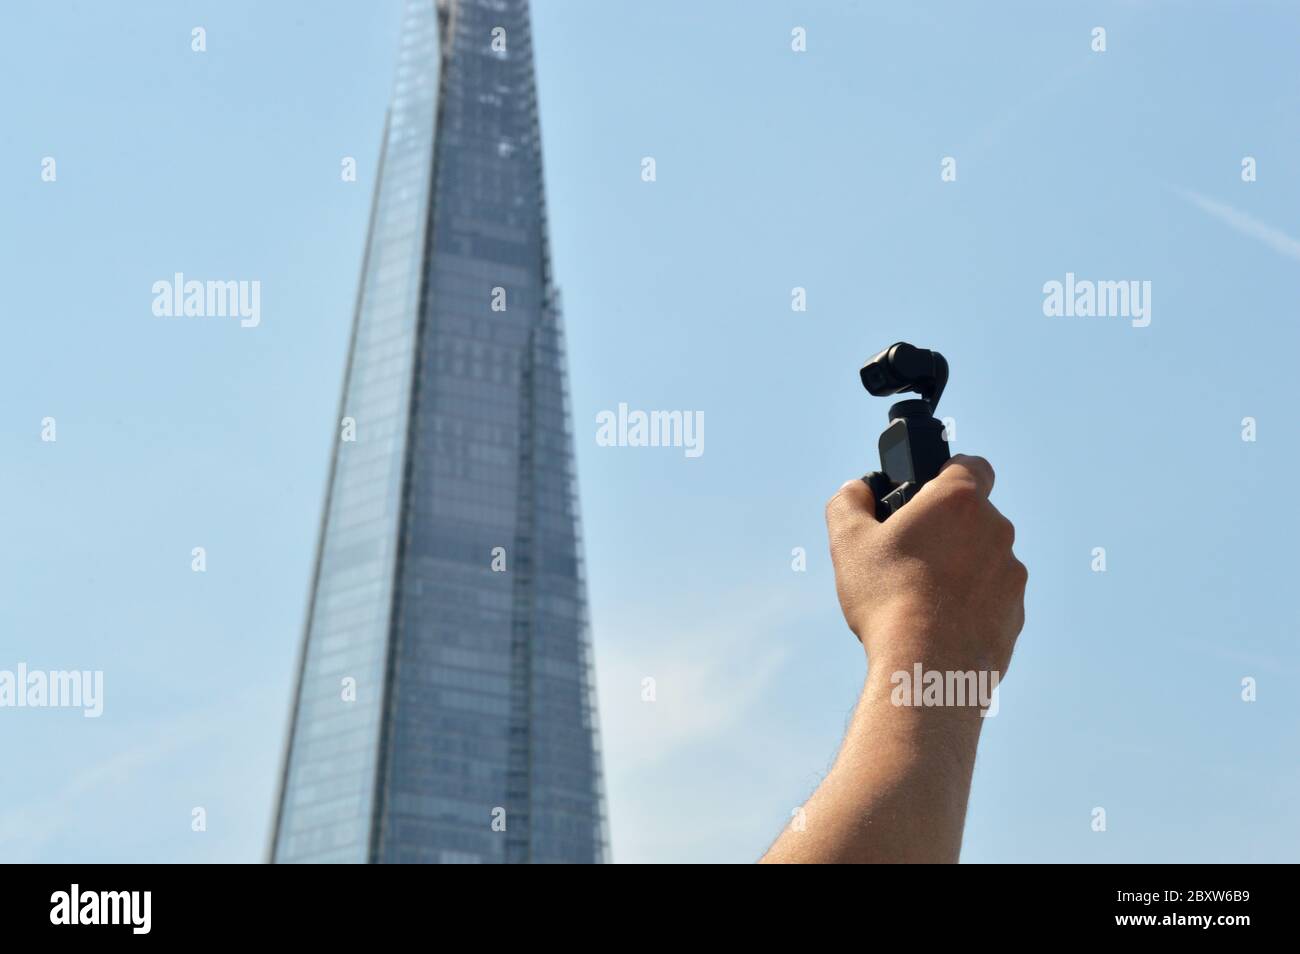 London, UK - August 2019: Male hand holding a DJI Osmo Pocket gimbal camera in front of famous British landmark Stock Photo